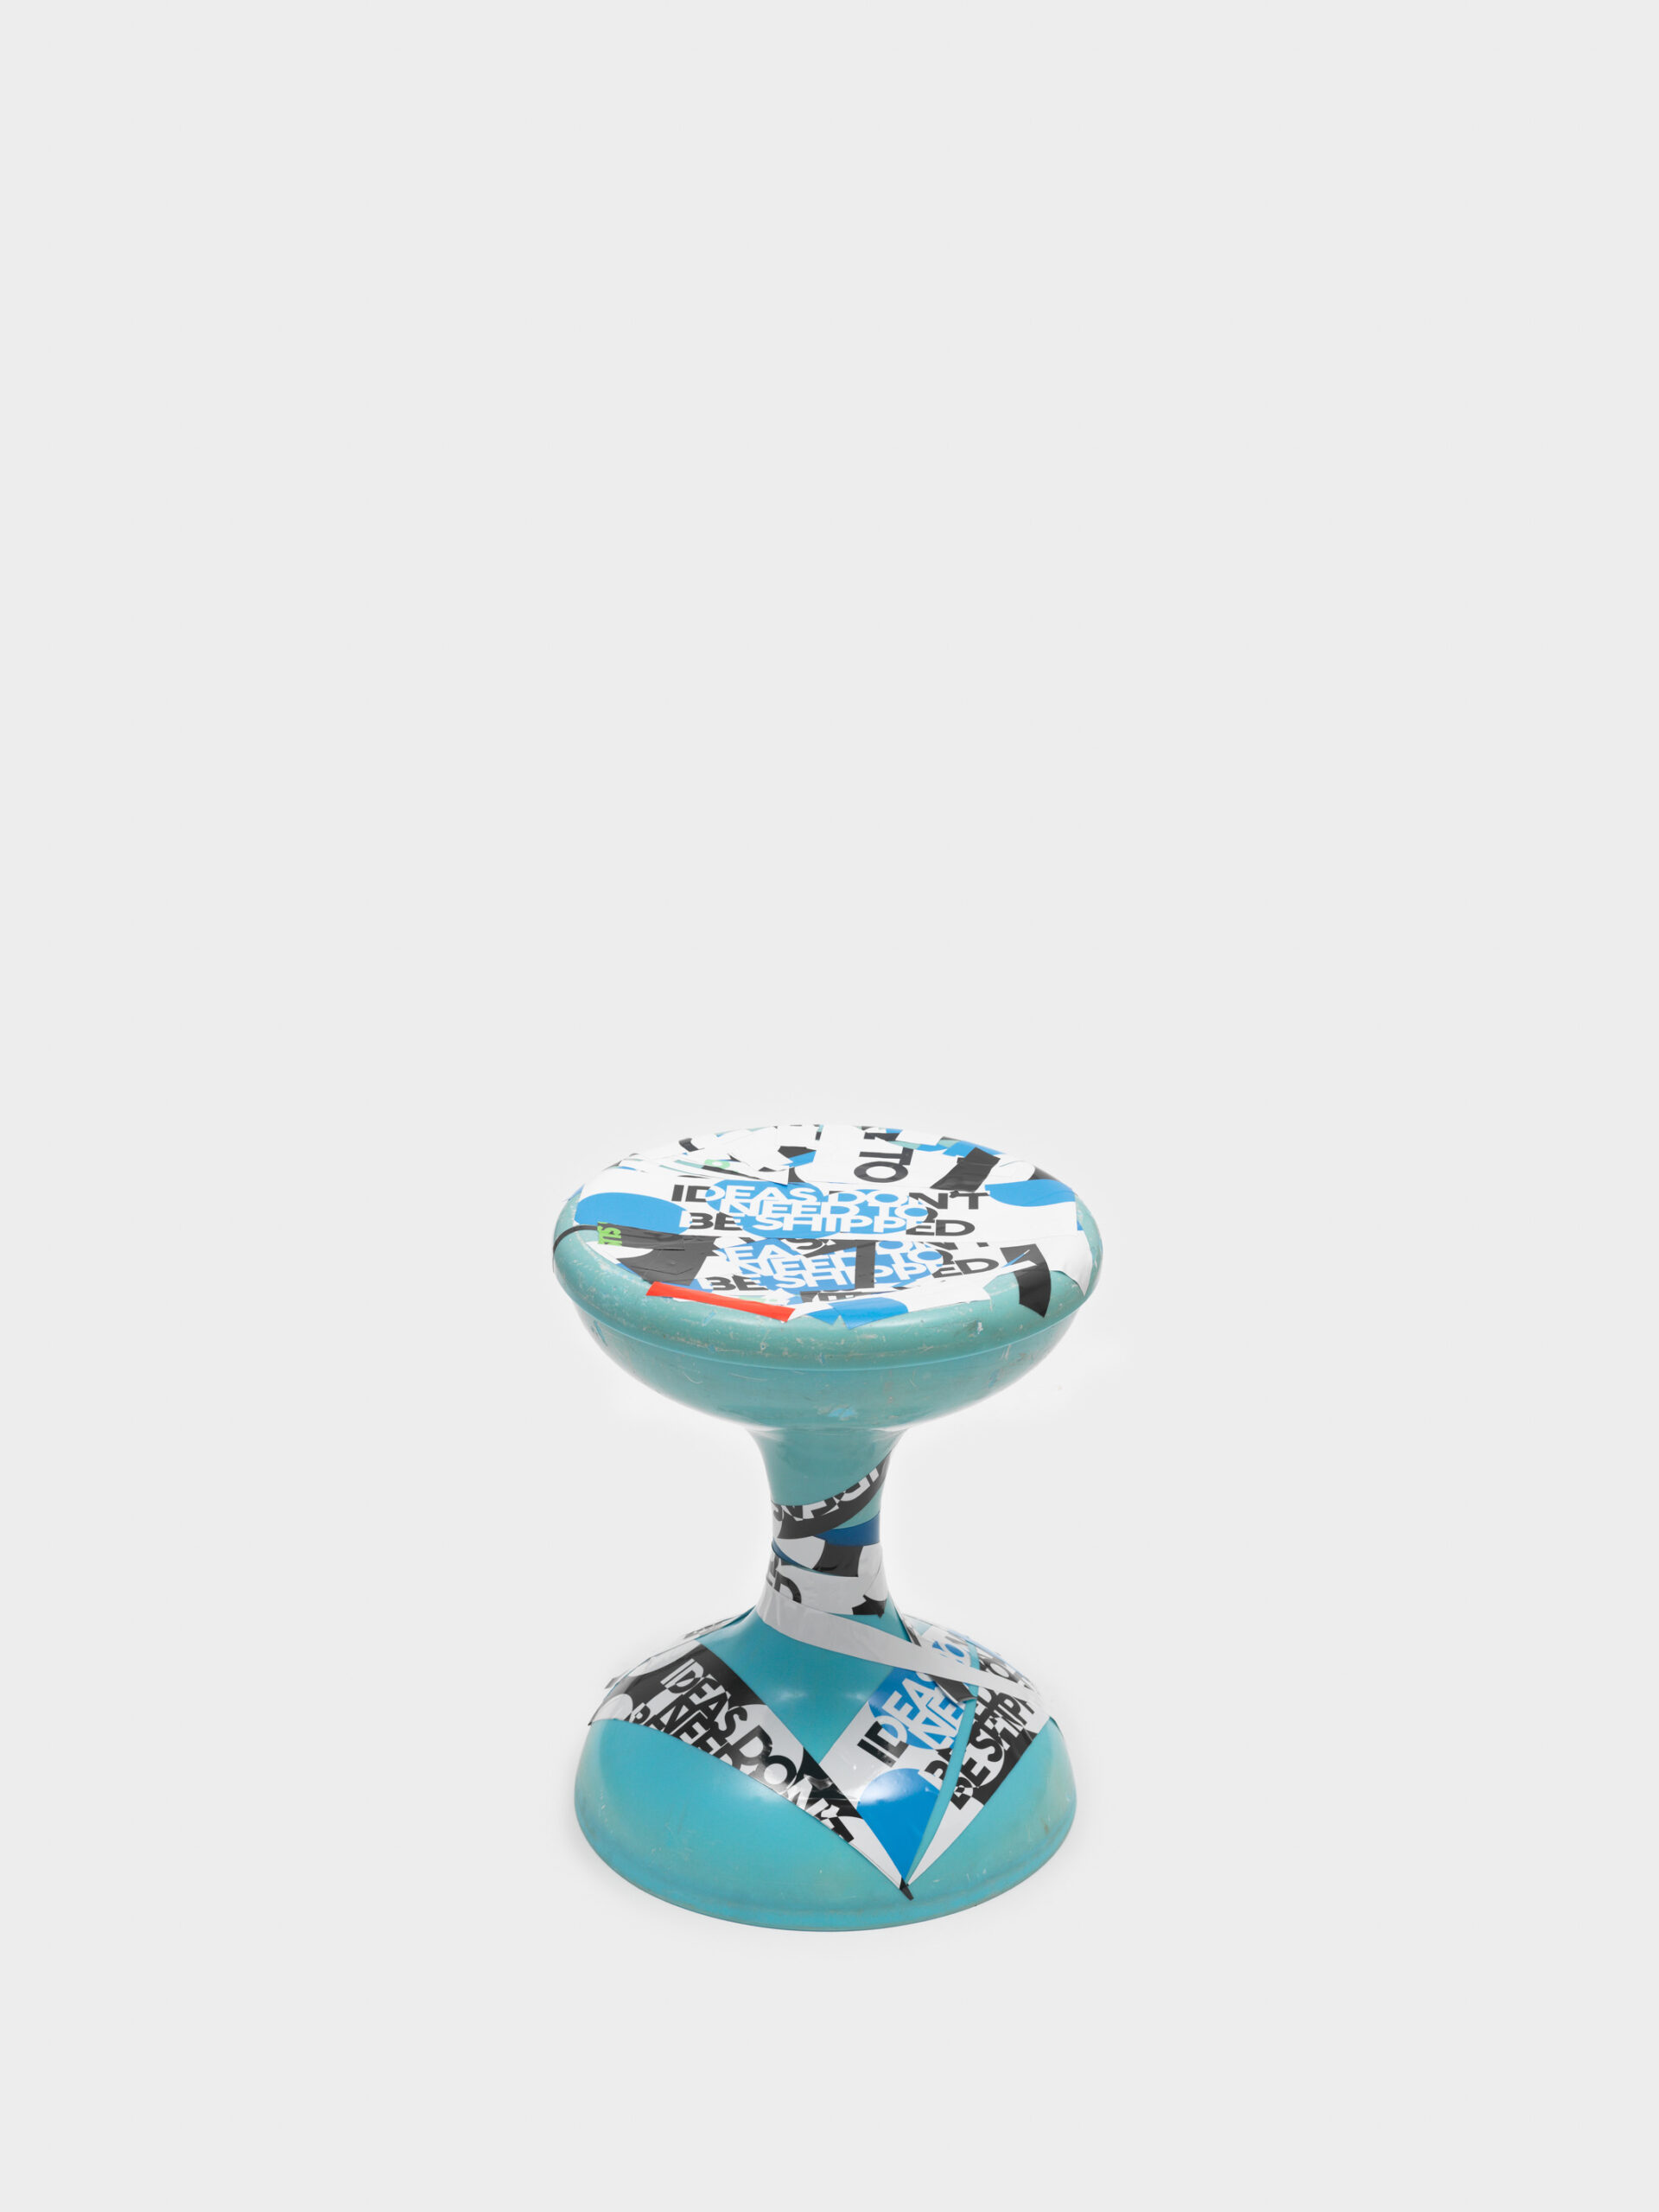 Product image: Vintage Plastic Stool, modified by Evi, claim stickers, 2022 Athens, 4.6 tons